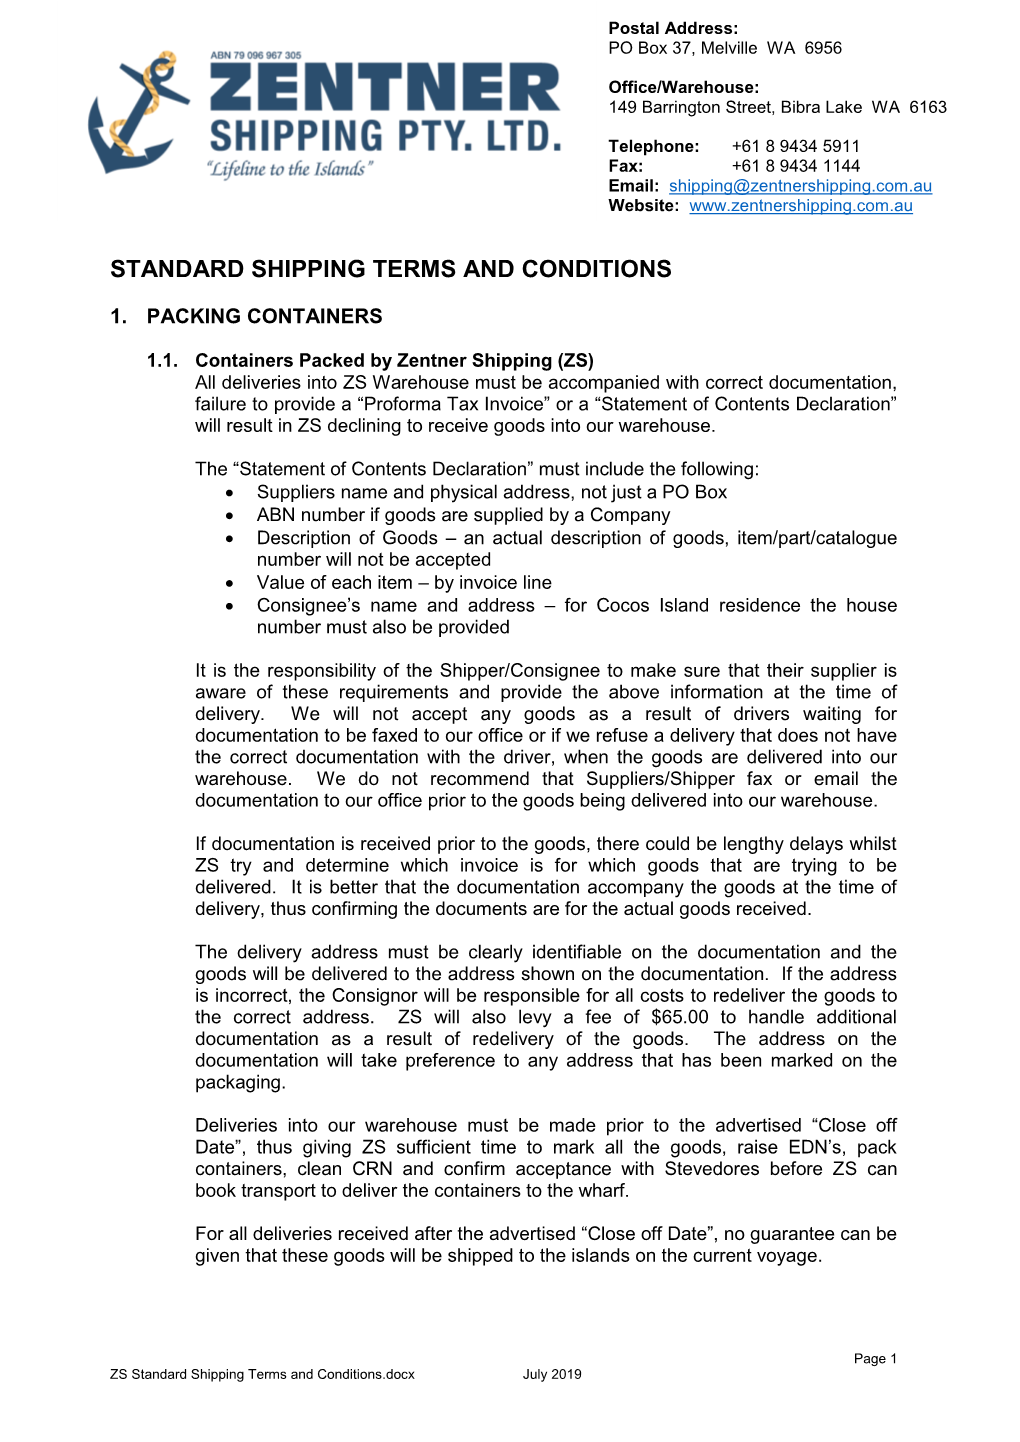 Standard Shipping Terms and Conditions